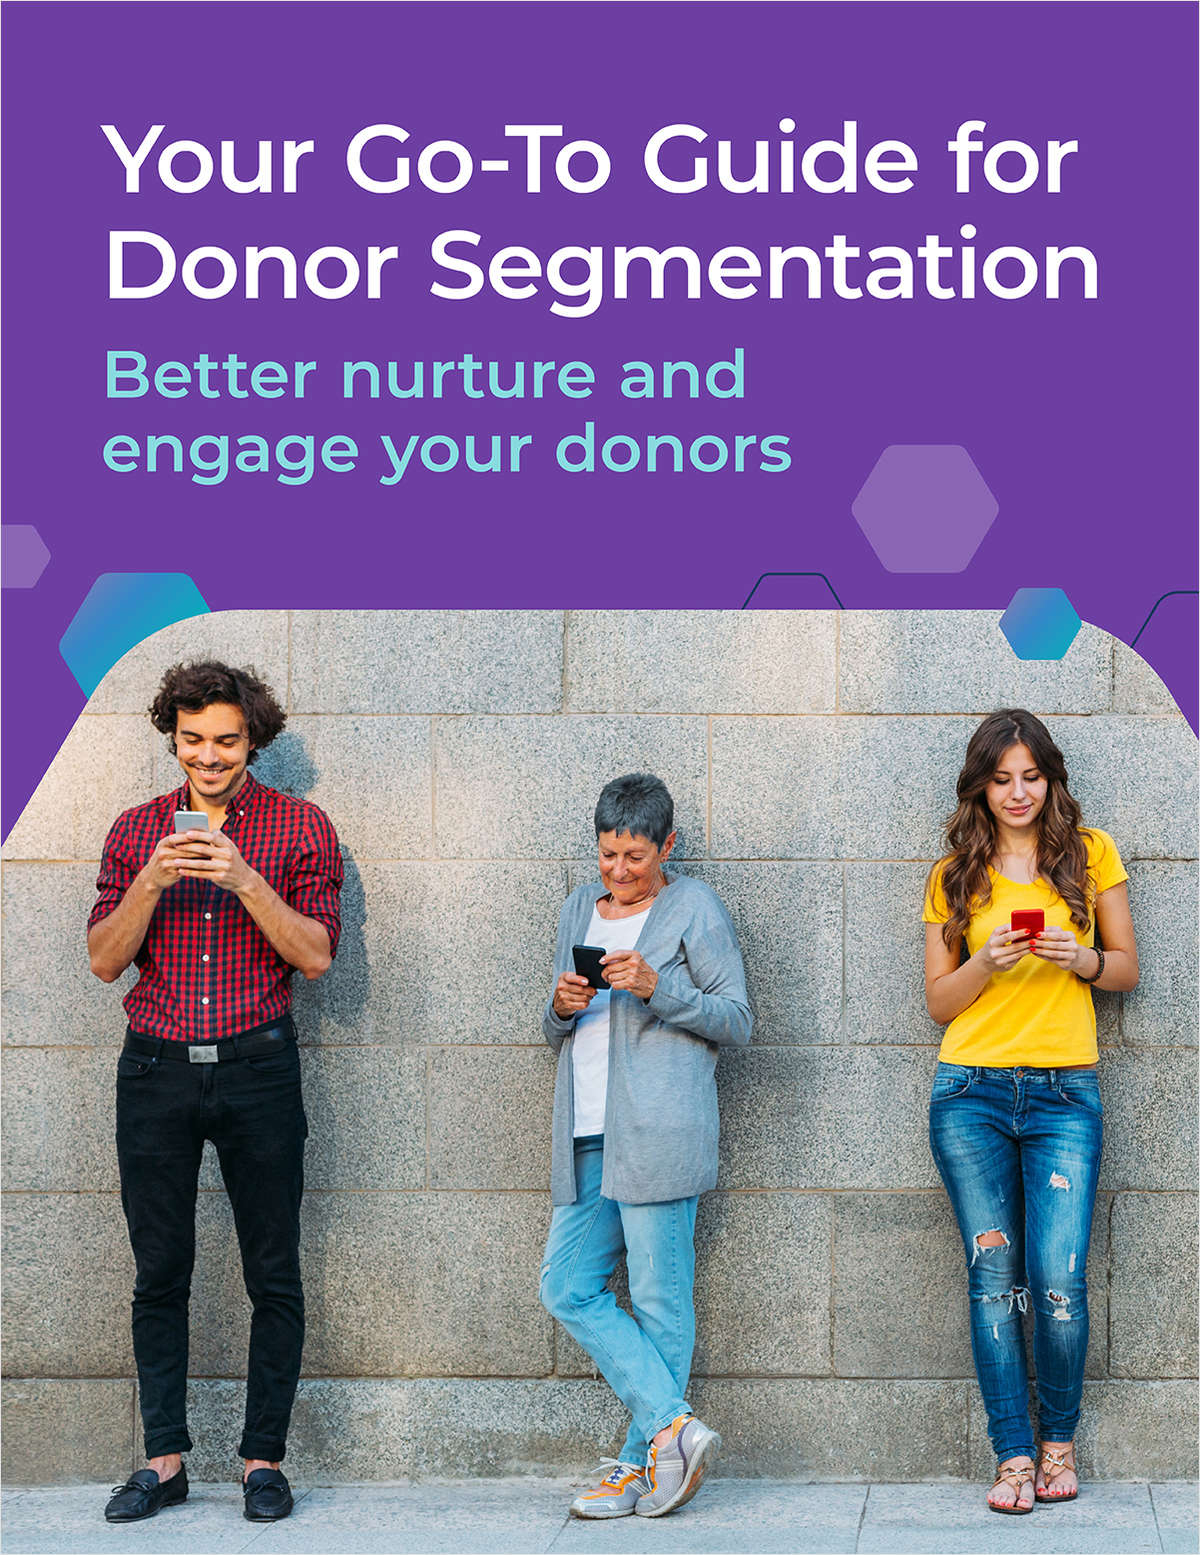 Your Go-To Guide for Donor Segmentation